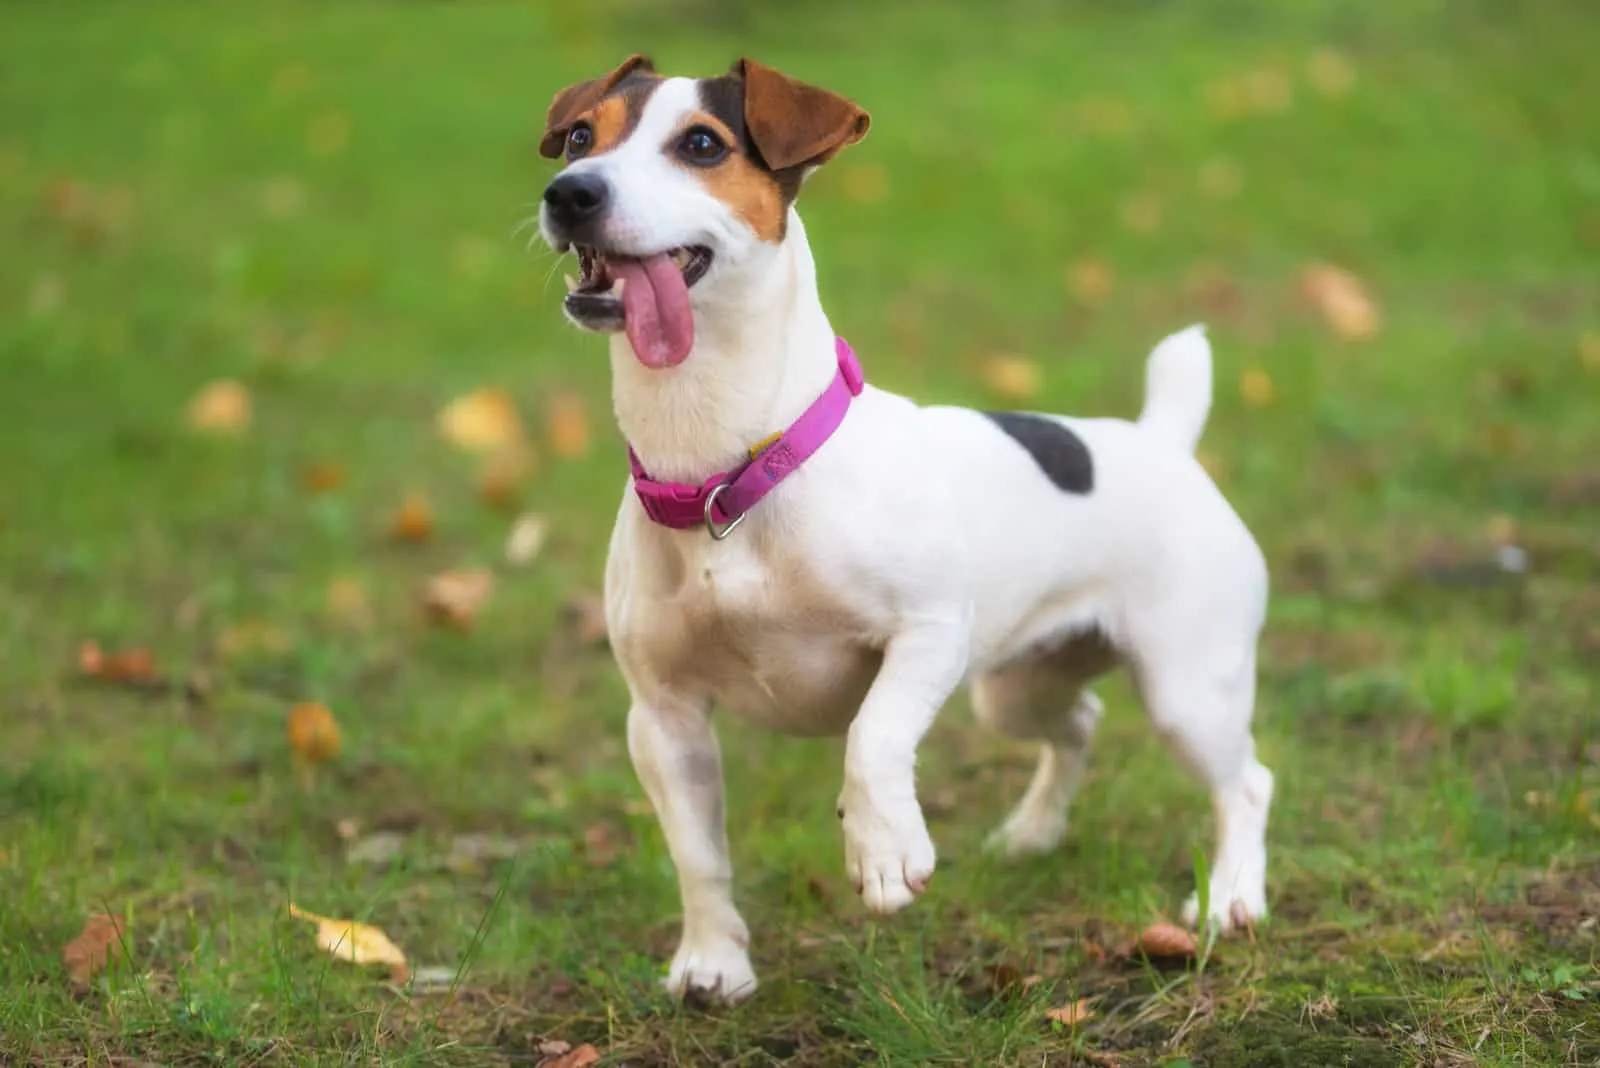 cheerful Jack Russel stands on the grass in the park